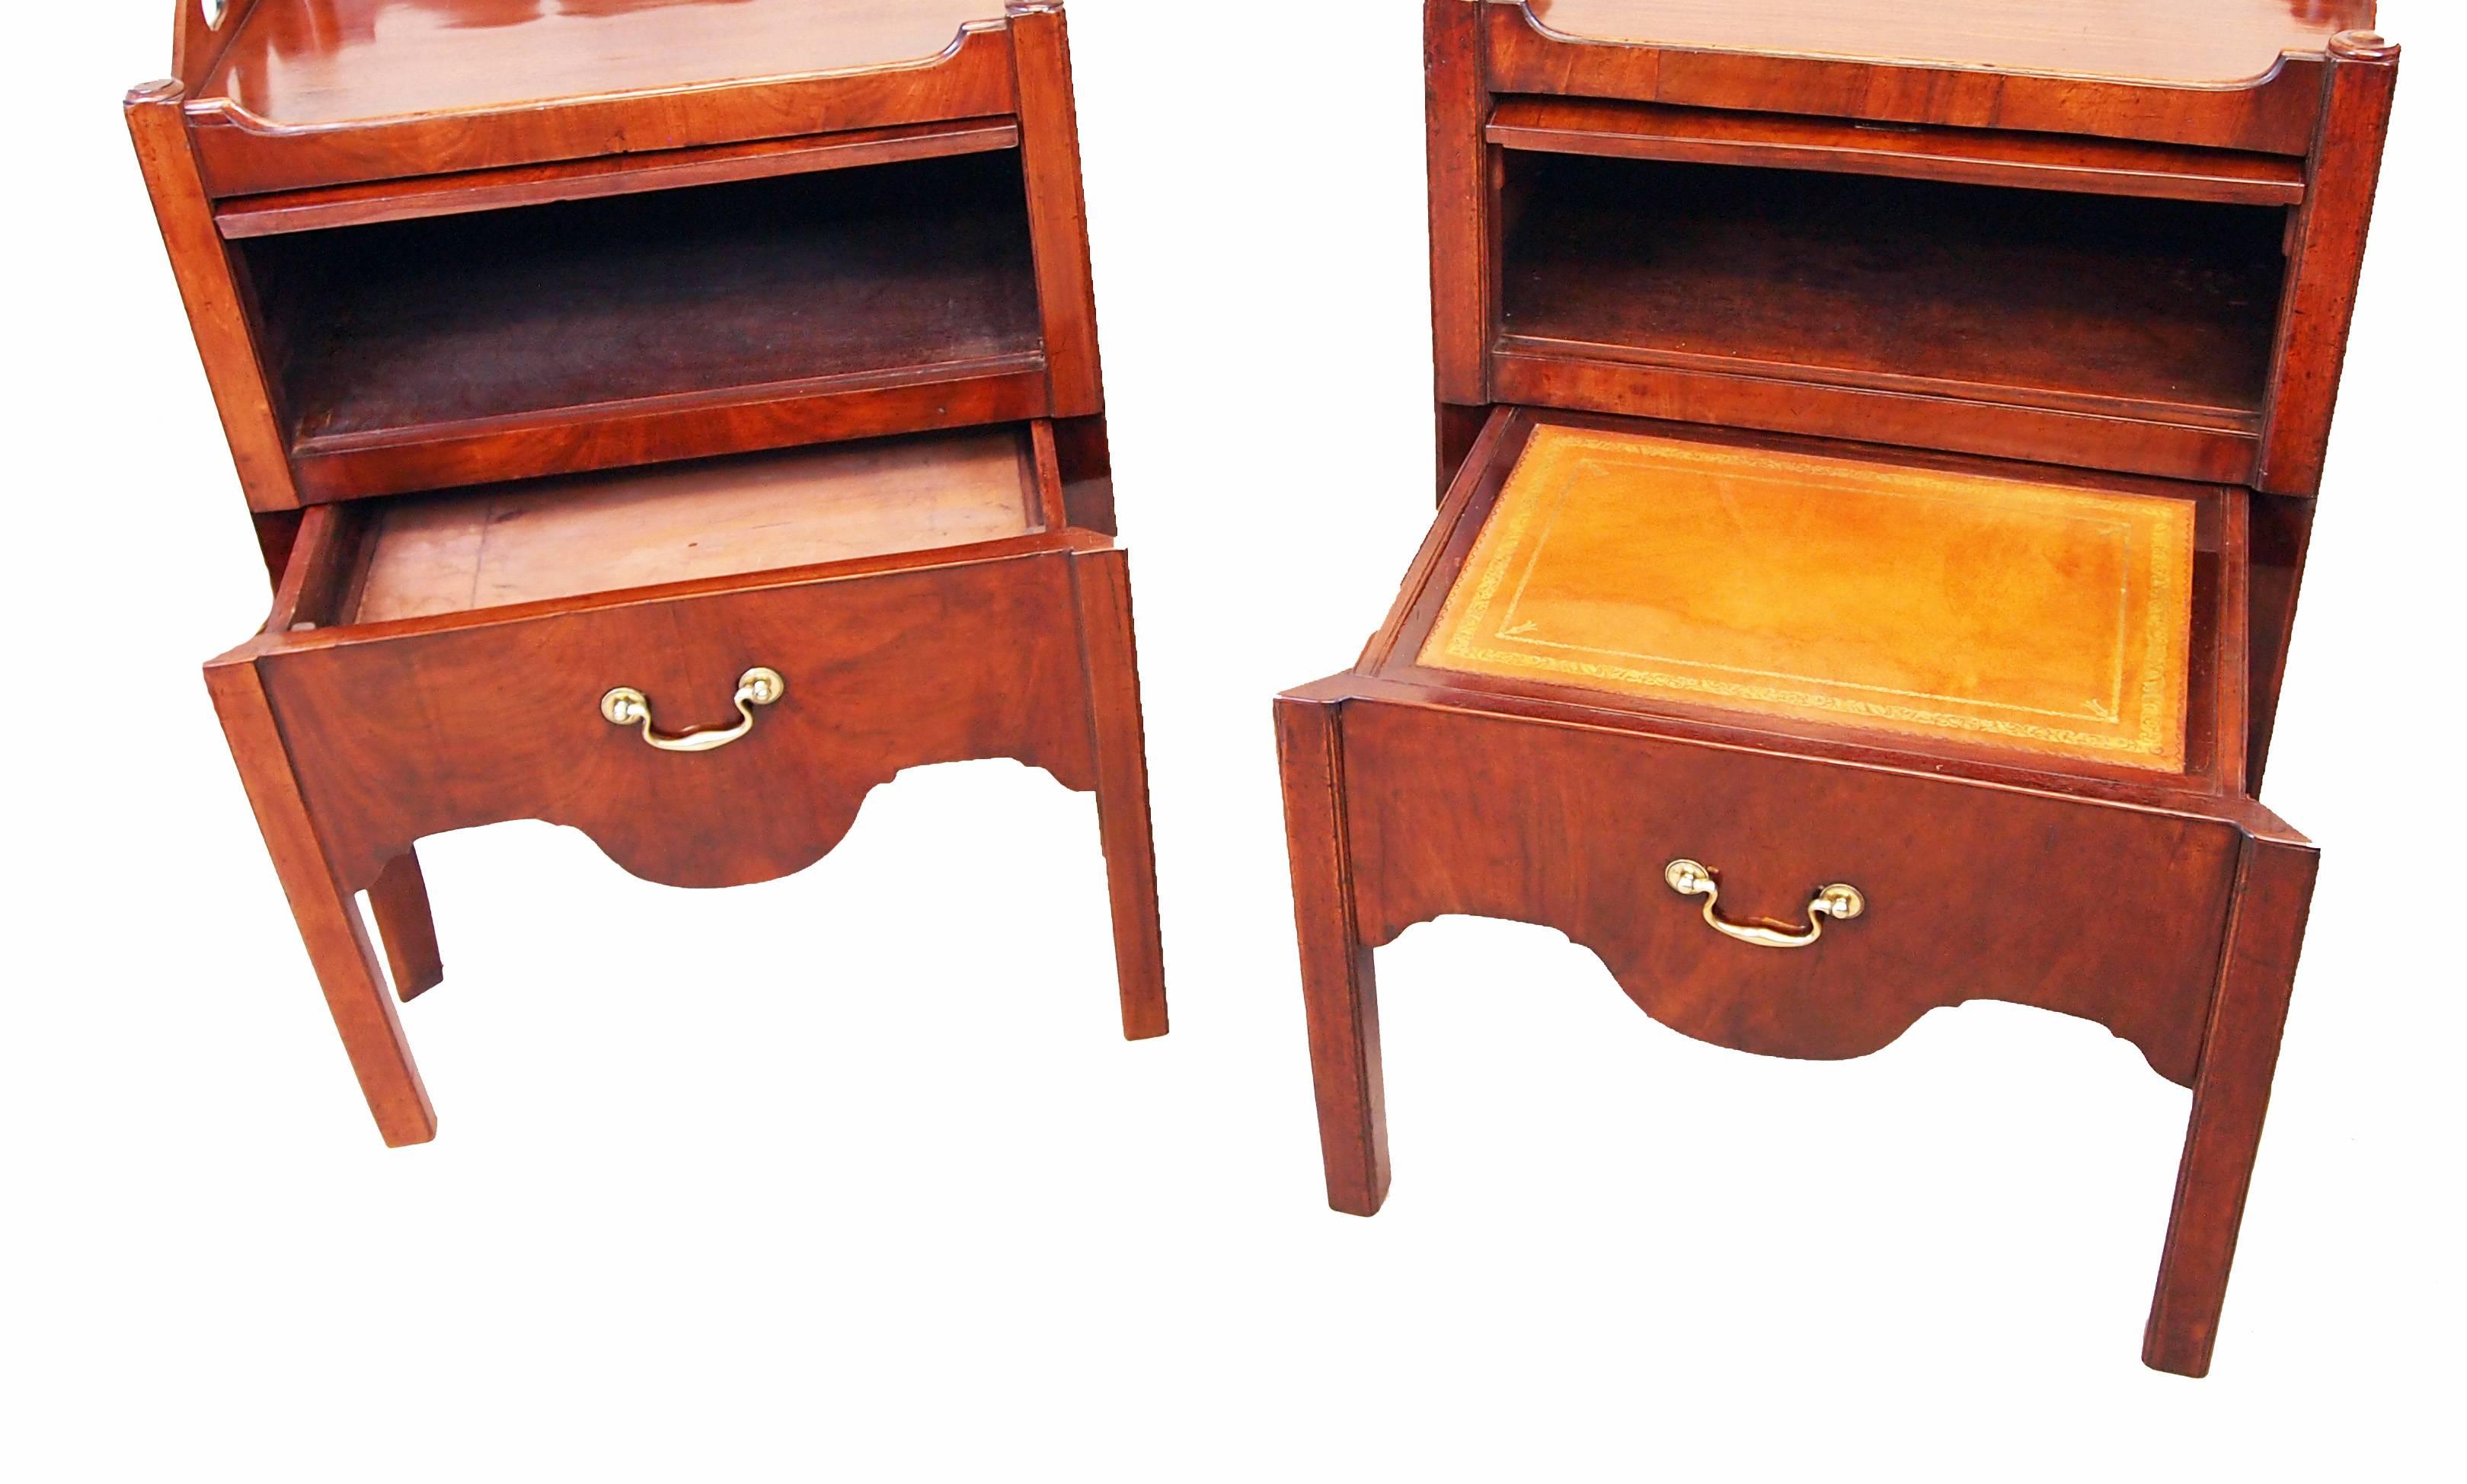 An extremely well matched pair of 18th century mahogany tray top
commodes, or bedside night tables, having well figured tops with shaped
galleries and pierced handles above up and over cupboard doors and
converted drawers with original brass swan